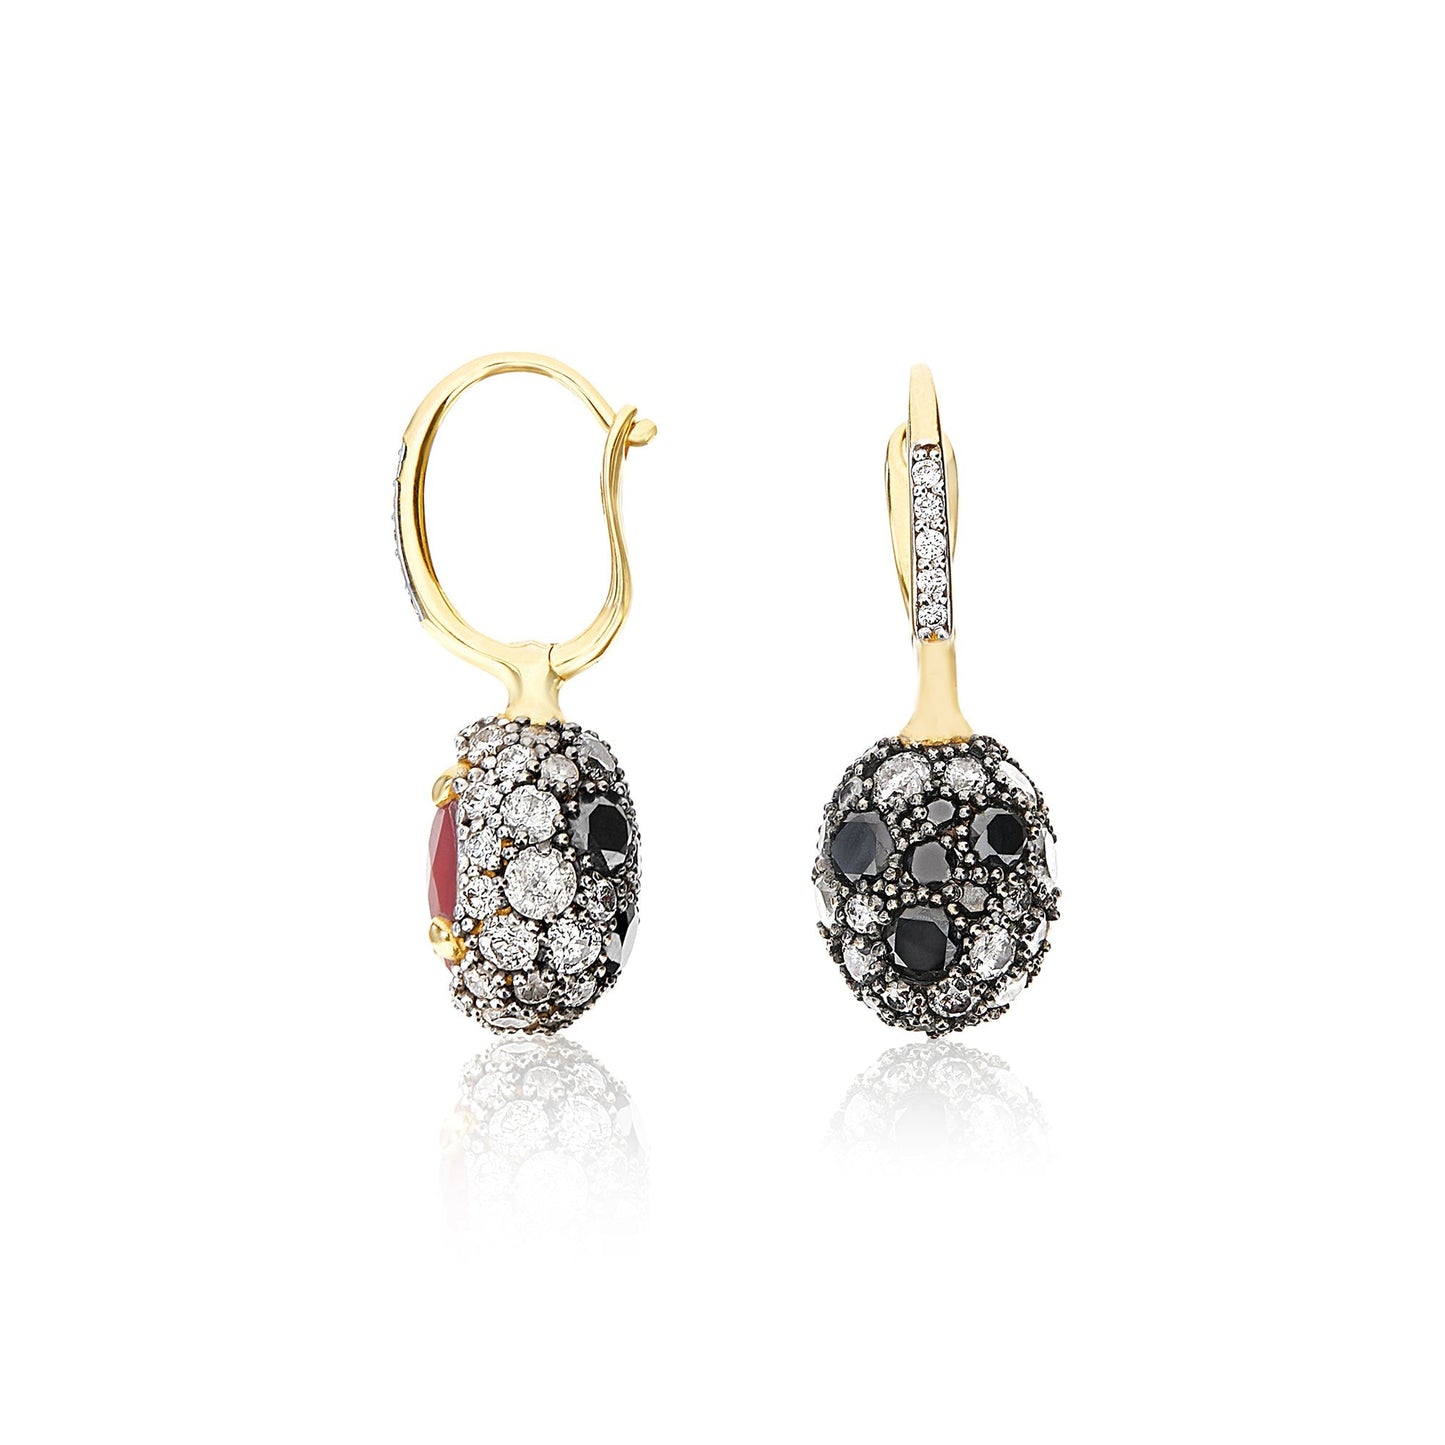 DANCING "REVERSE" CILIEGINE GOLD DOUBLE-FACE BALL DROP EARRINGS (SMALL)